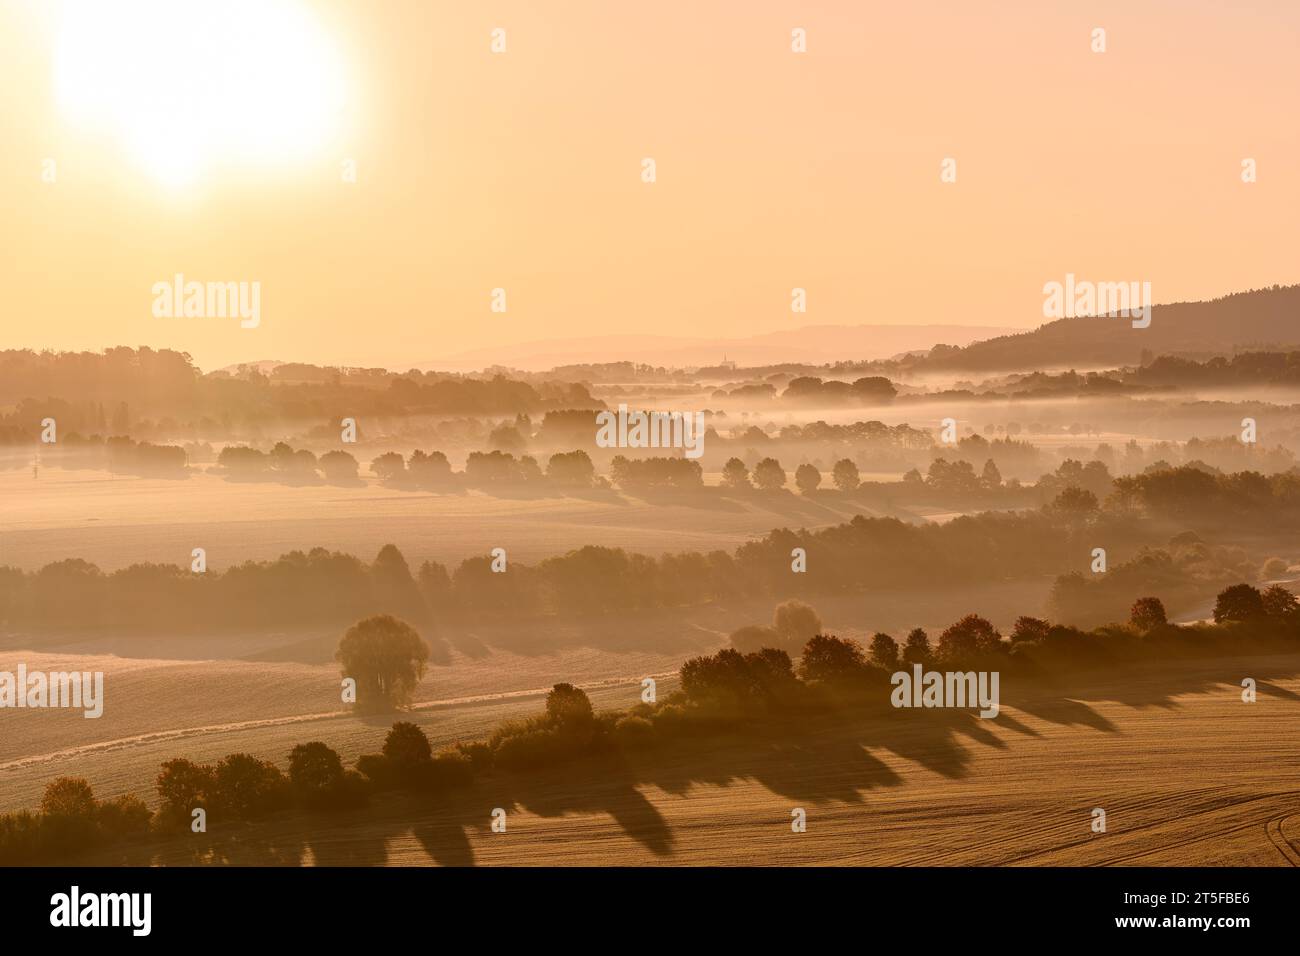 Sleepy morning in Bohemian Paradise. Aerial view of misty morning landscape with rising sun. Stock Photo